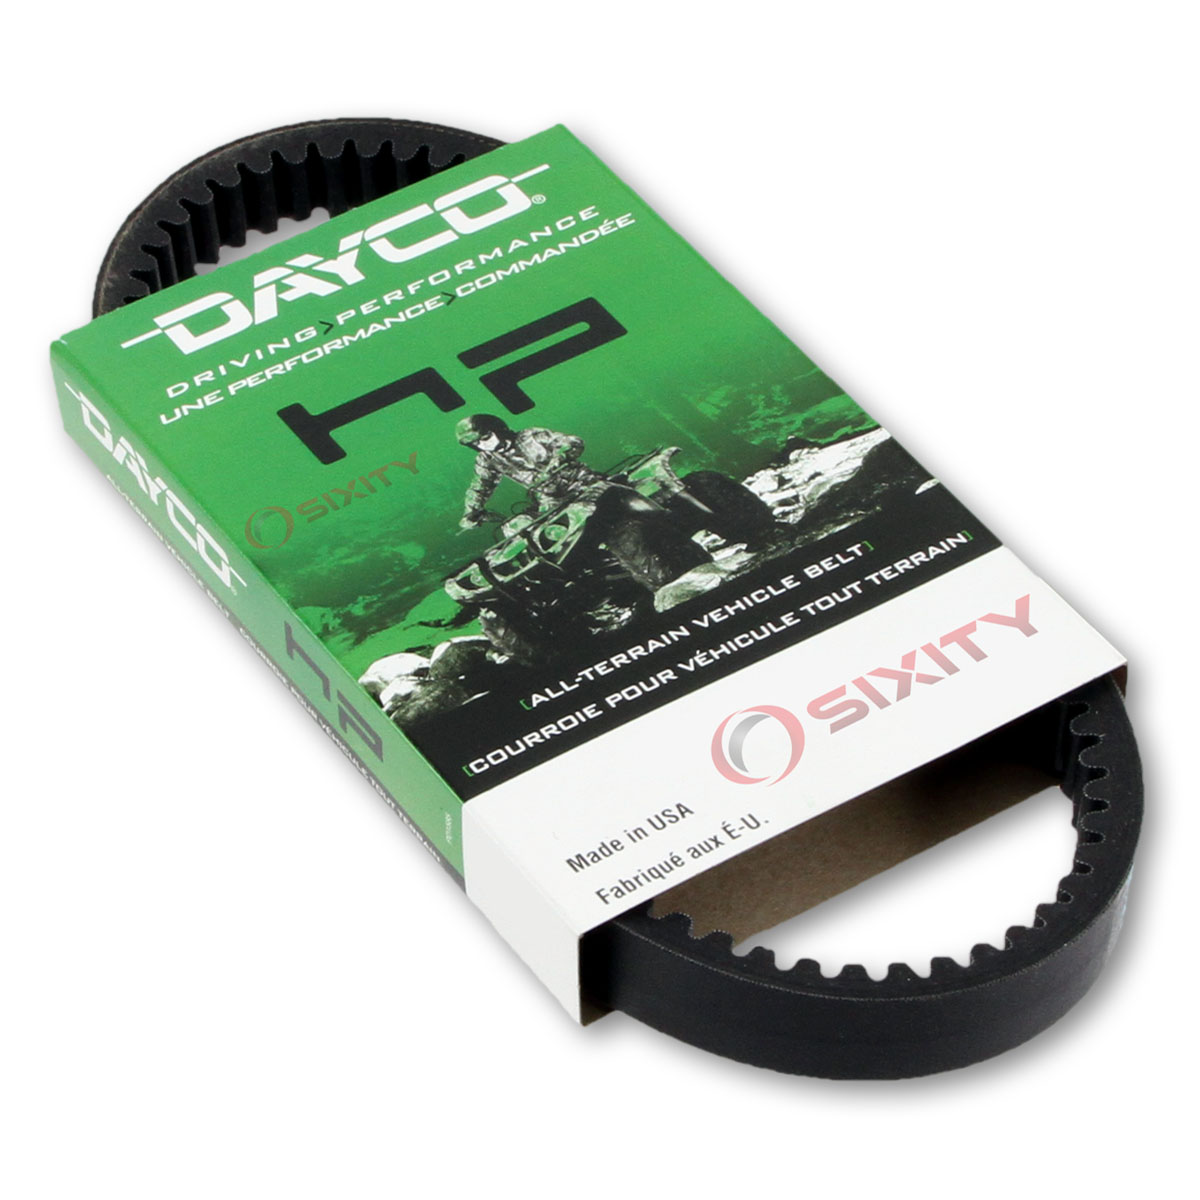 Dayco HP Drive Belt for 2005-2006 Arctic Cat 400 4x4 Auto VP